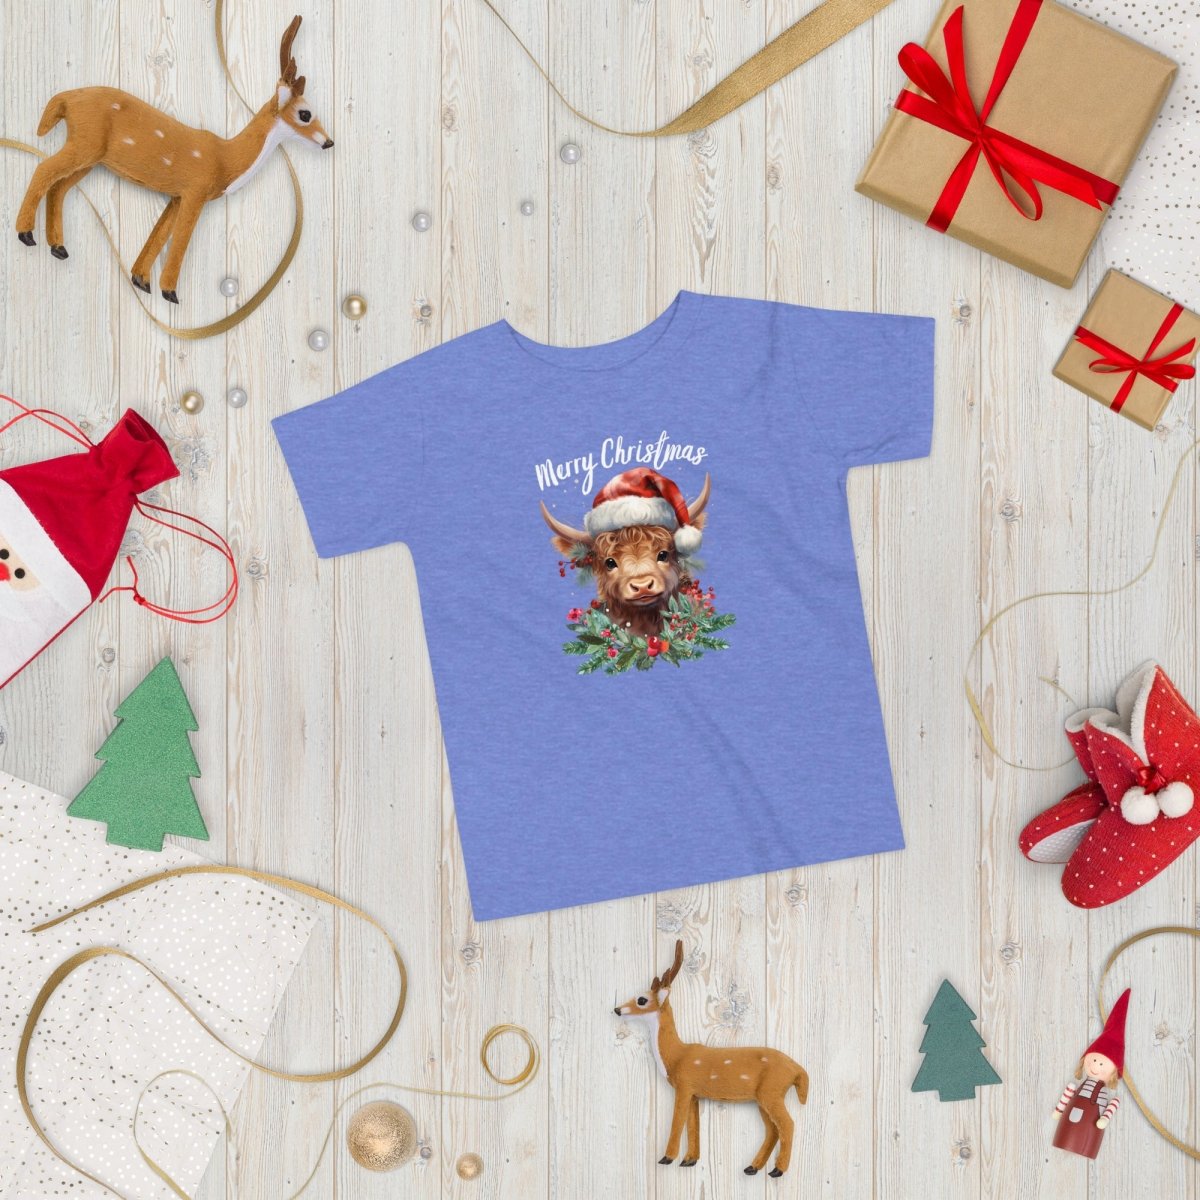 Christmas Highland Cow T-Shirt - High Quality Festive Family Children T-Shirt, Gift for Cow Lovers, Cute Christmas Shirt, Toddler Xmas Tee - Everything Pixel